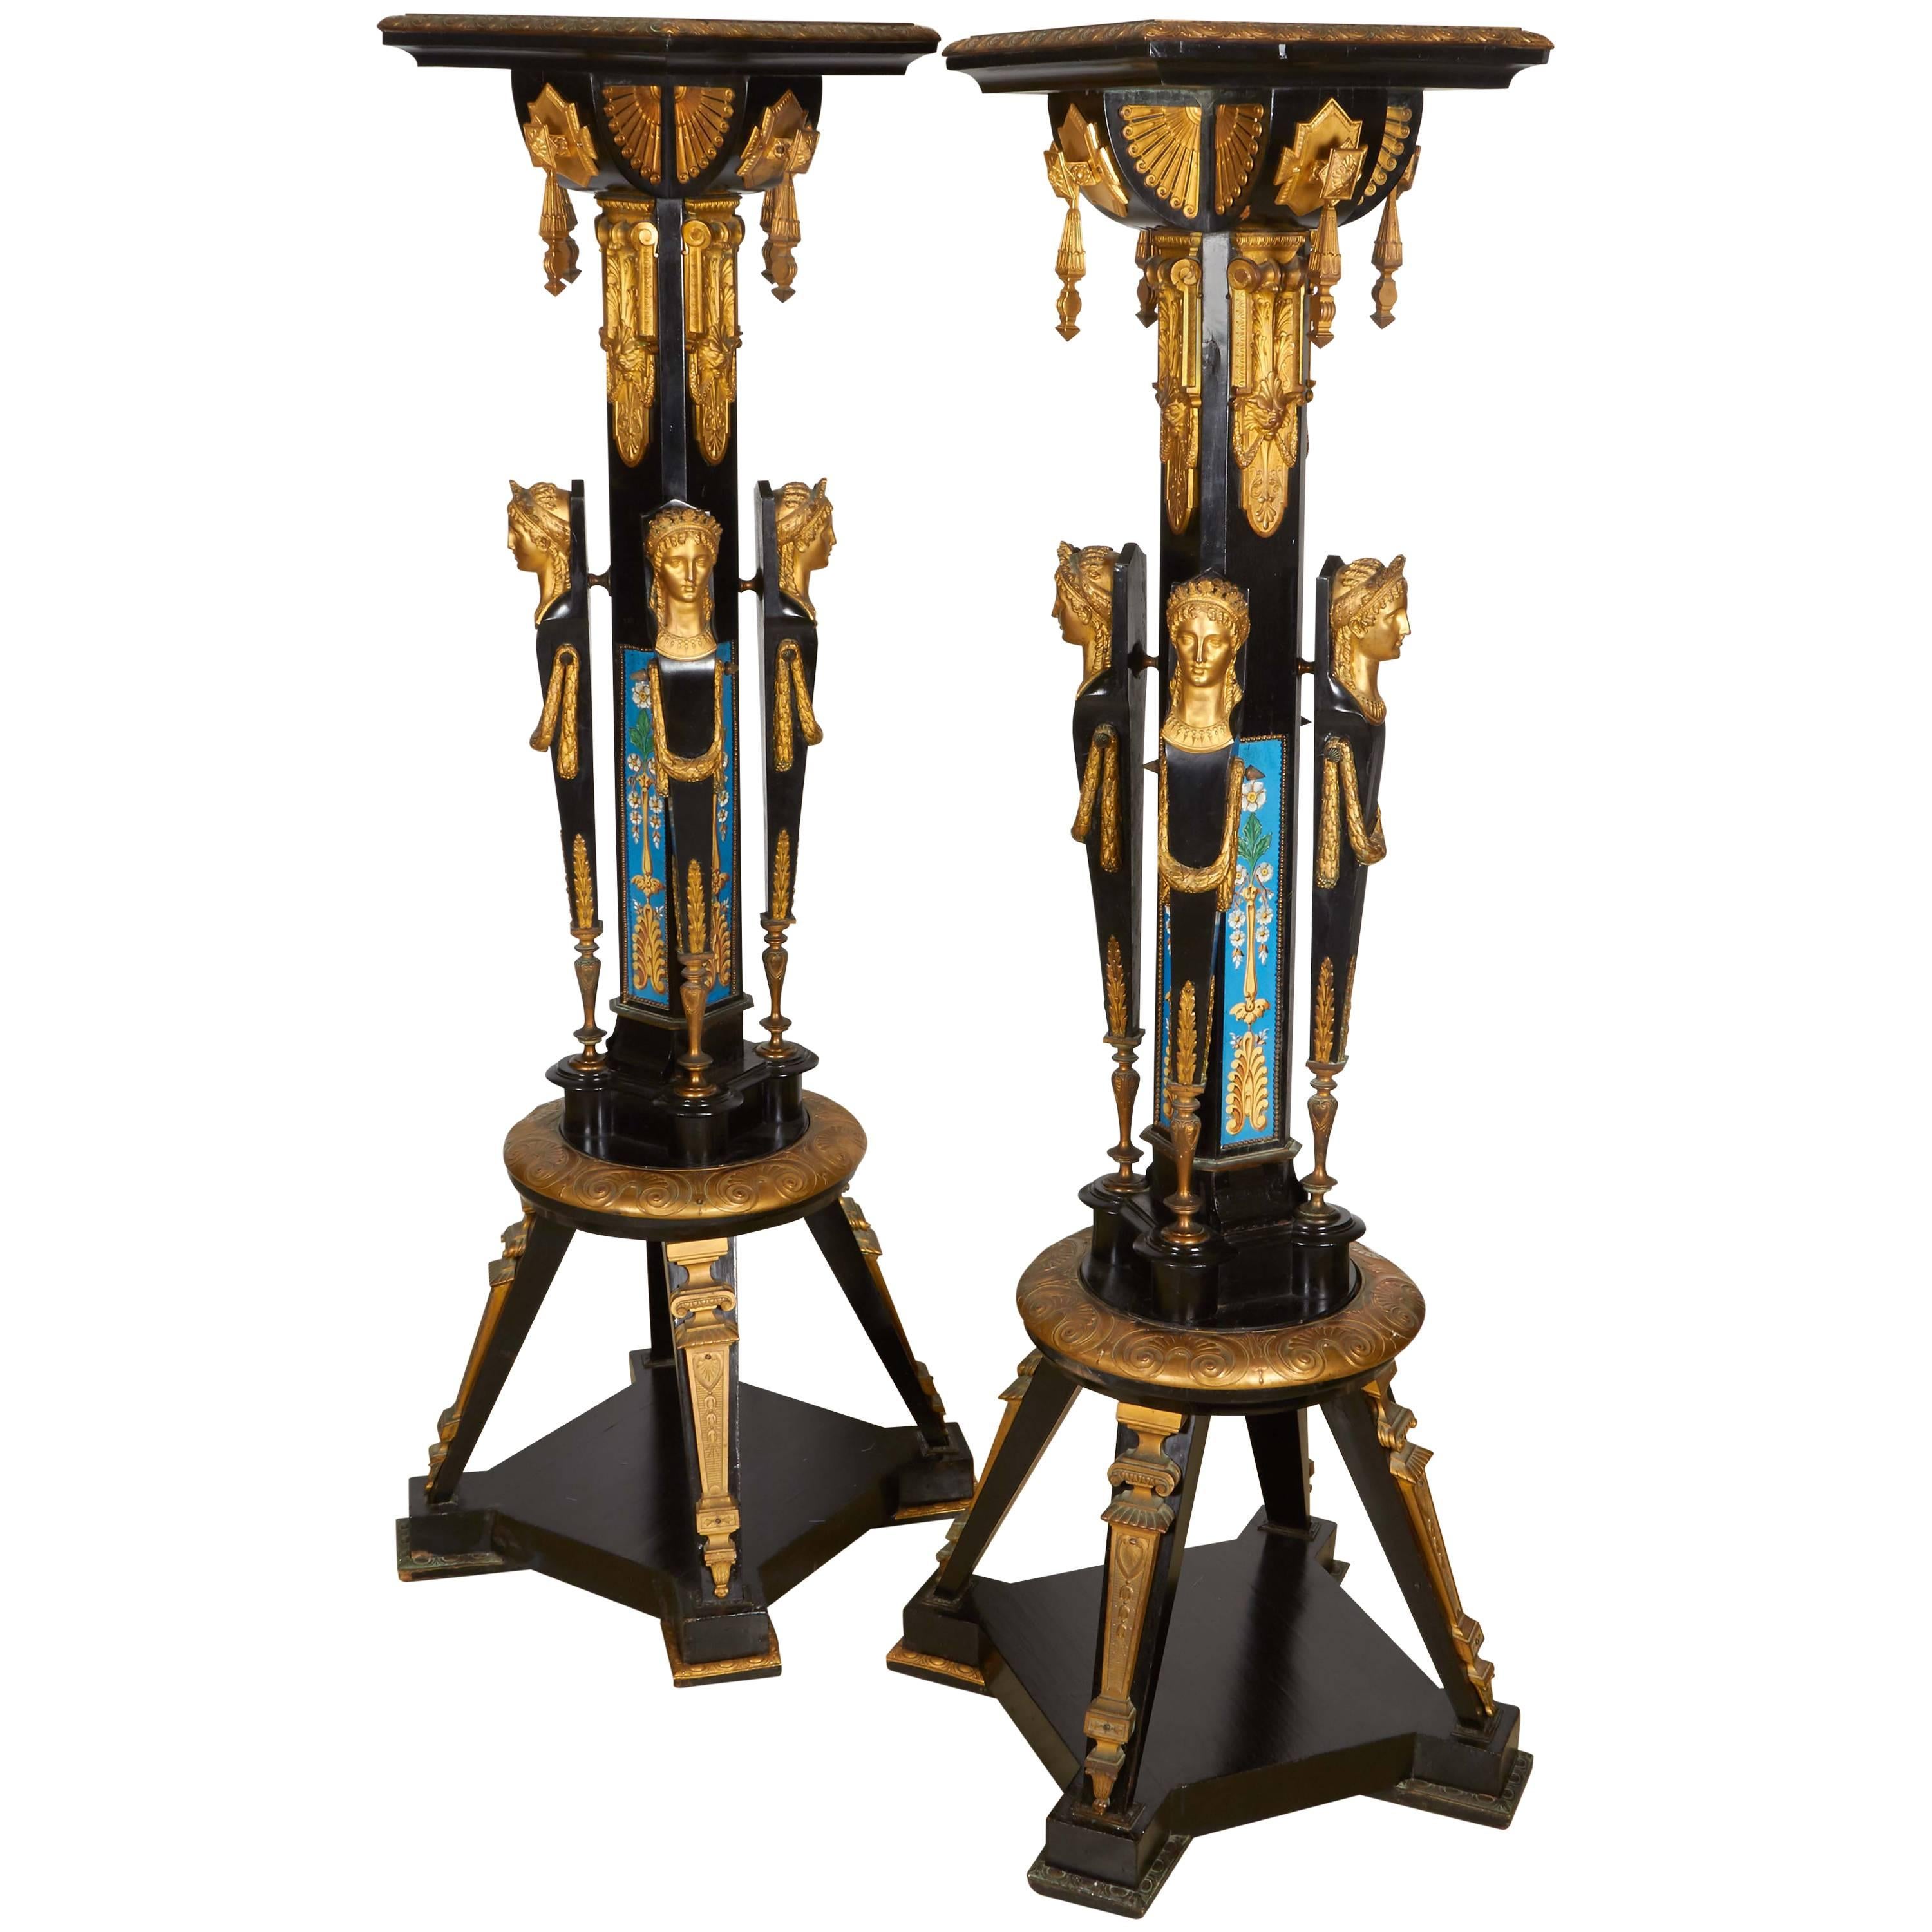 Highly Important Pair of Neo Grec Ormolu and Porcelain Mounted Ebony Torchieres